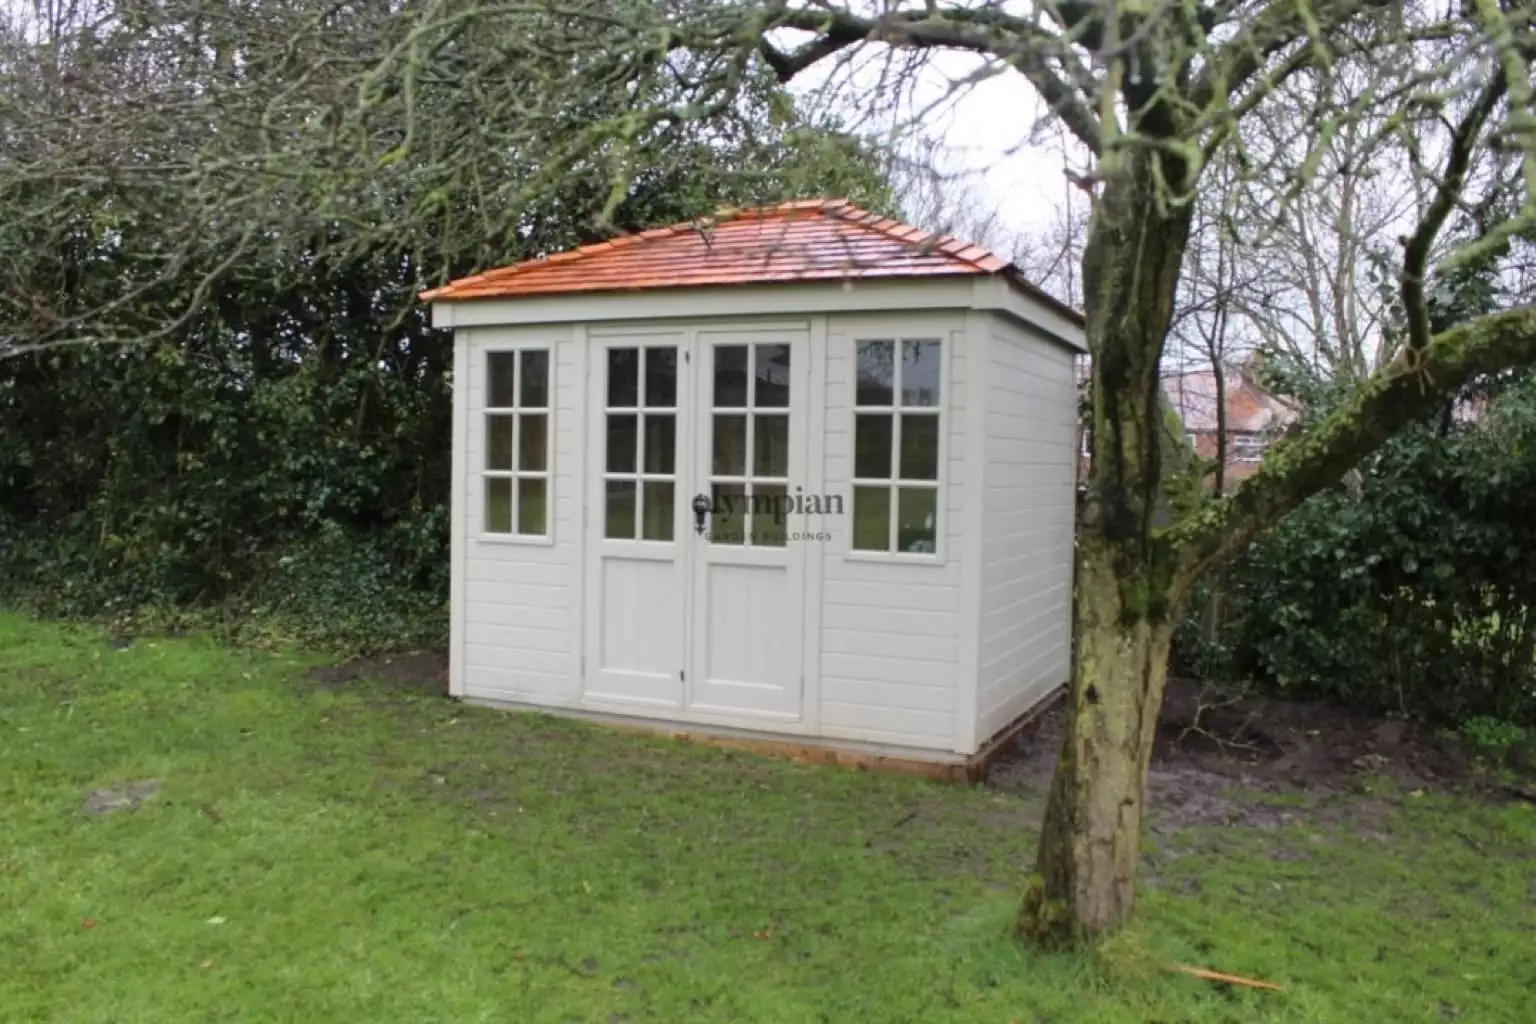 Hipped roof summerhouse with cedar shingles